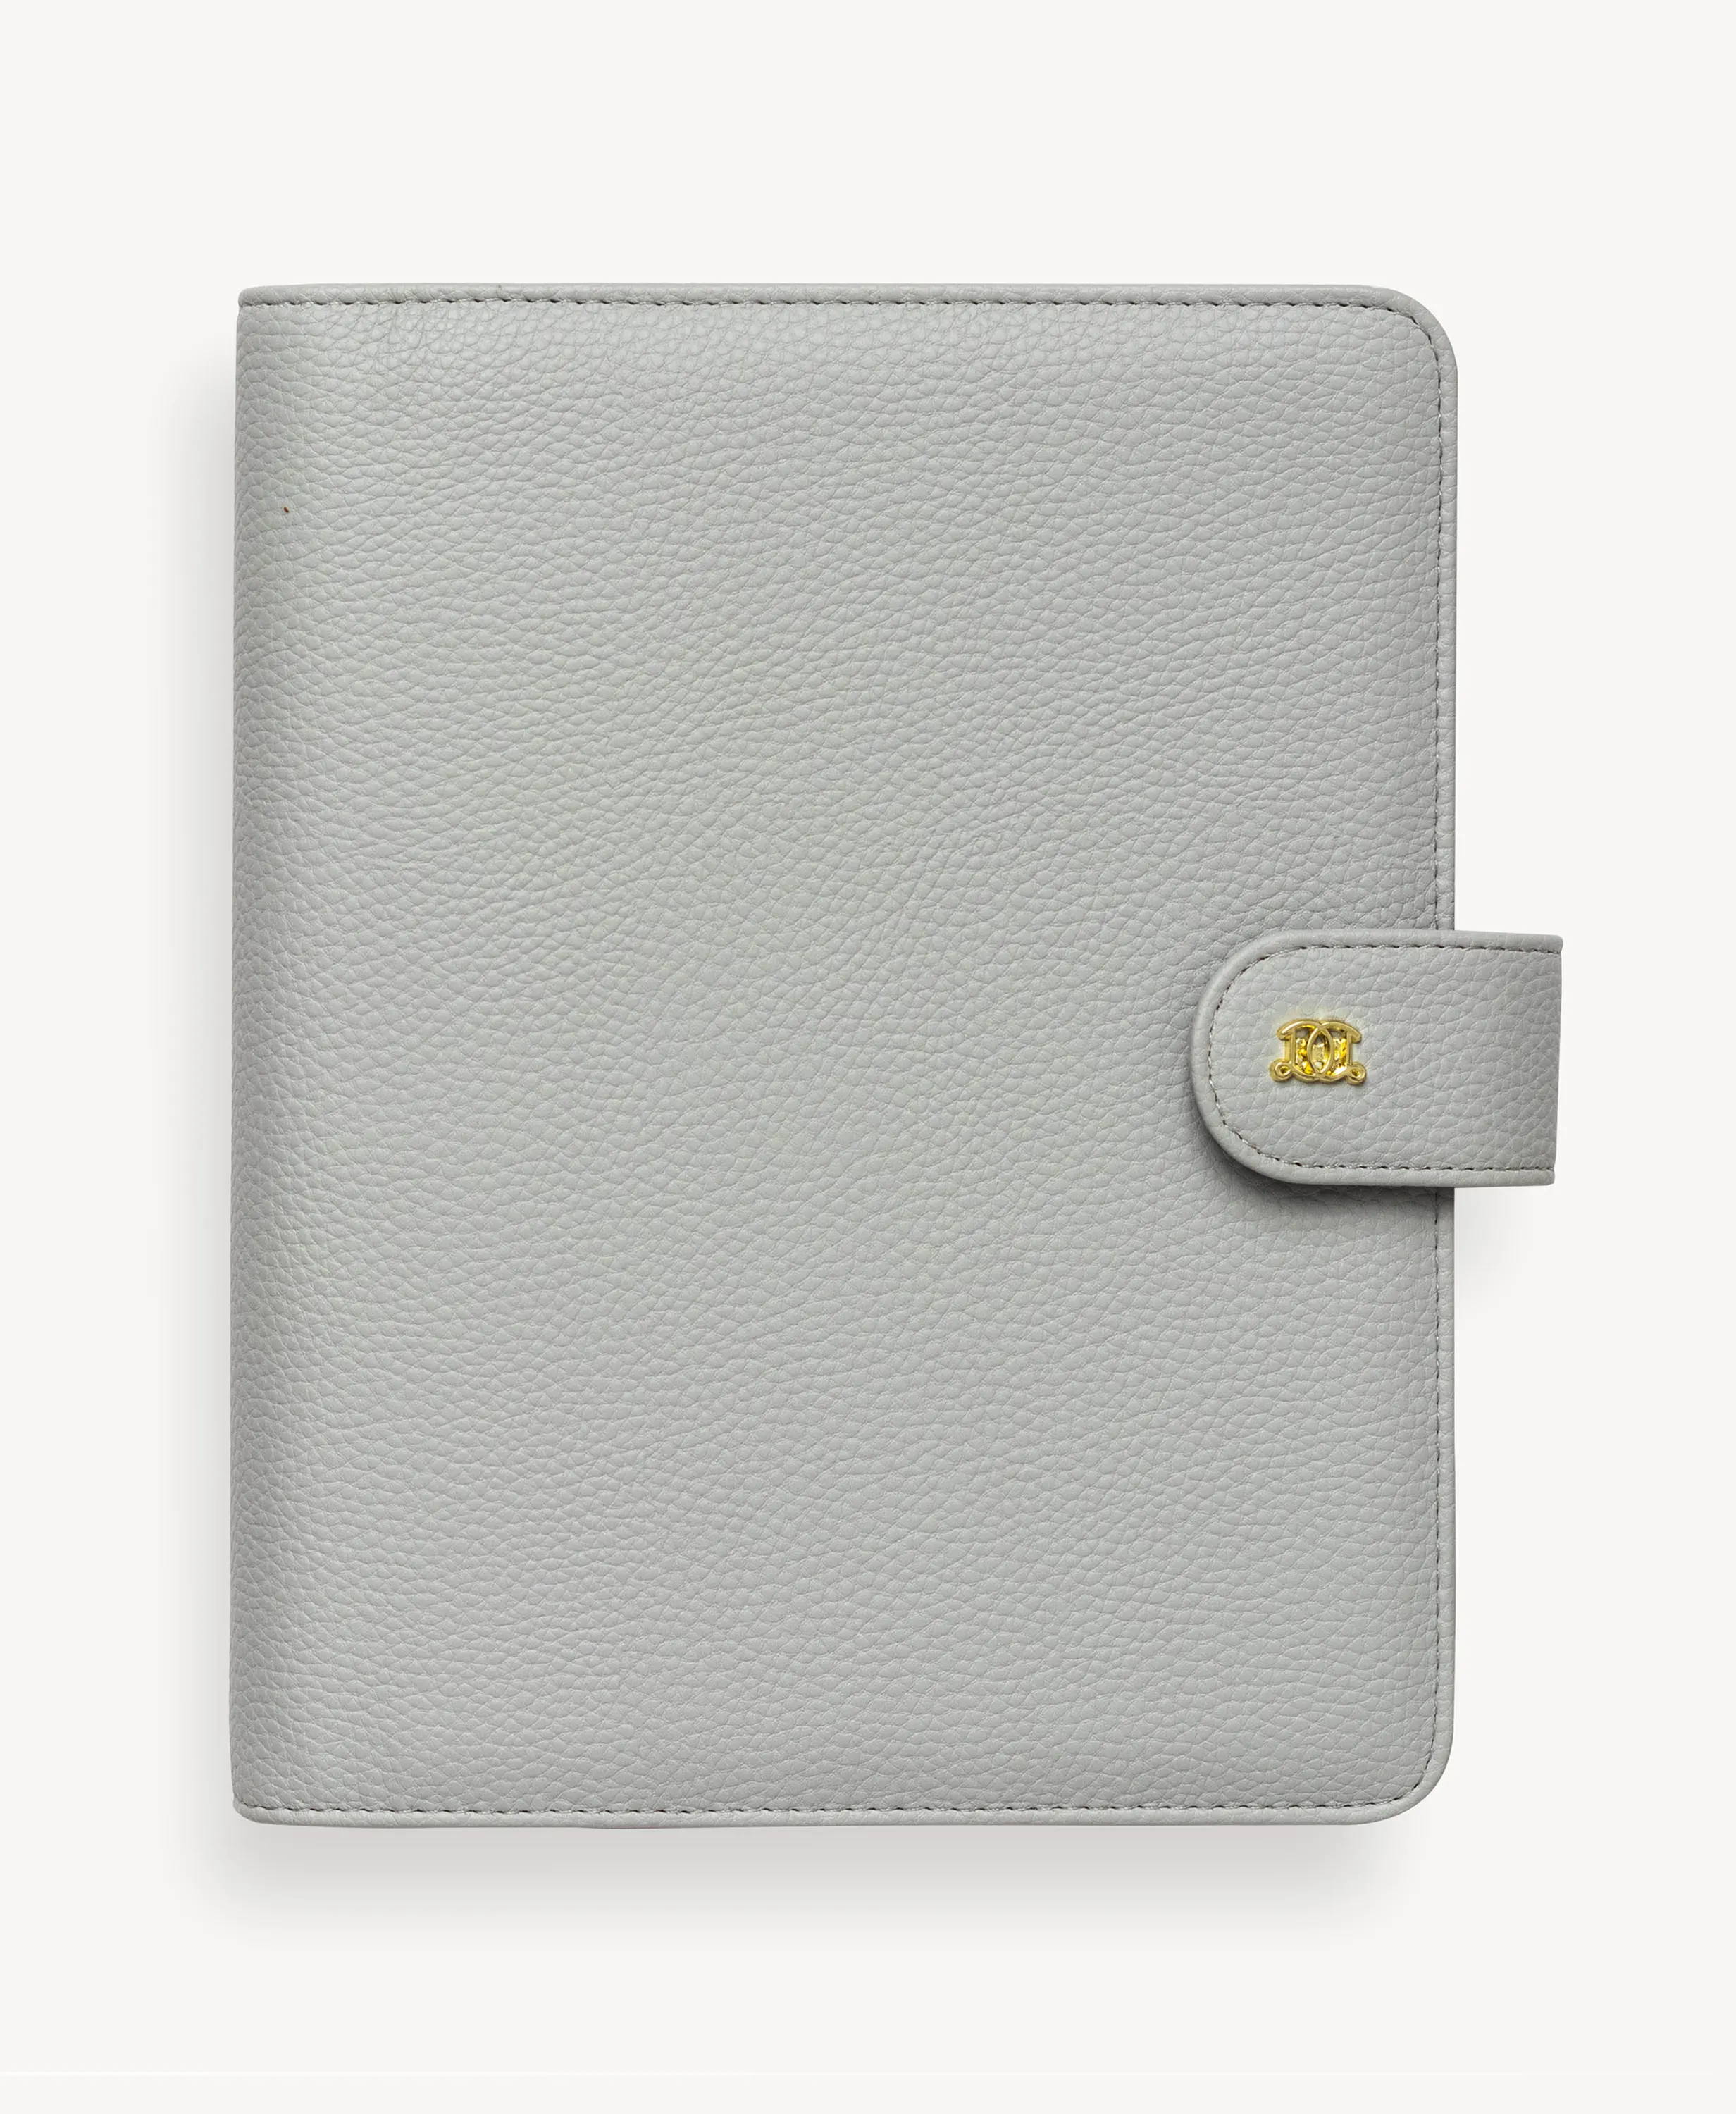 gray a5 planner, closed cover with snap closure and gold day designer logo